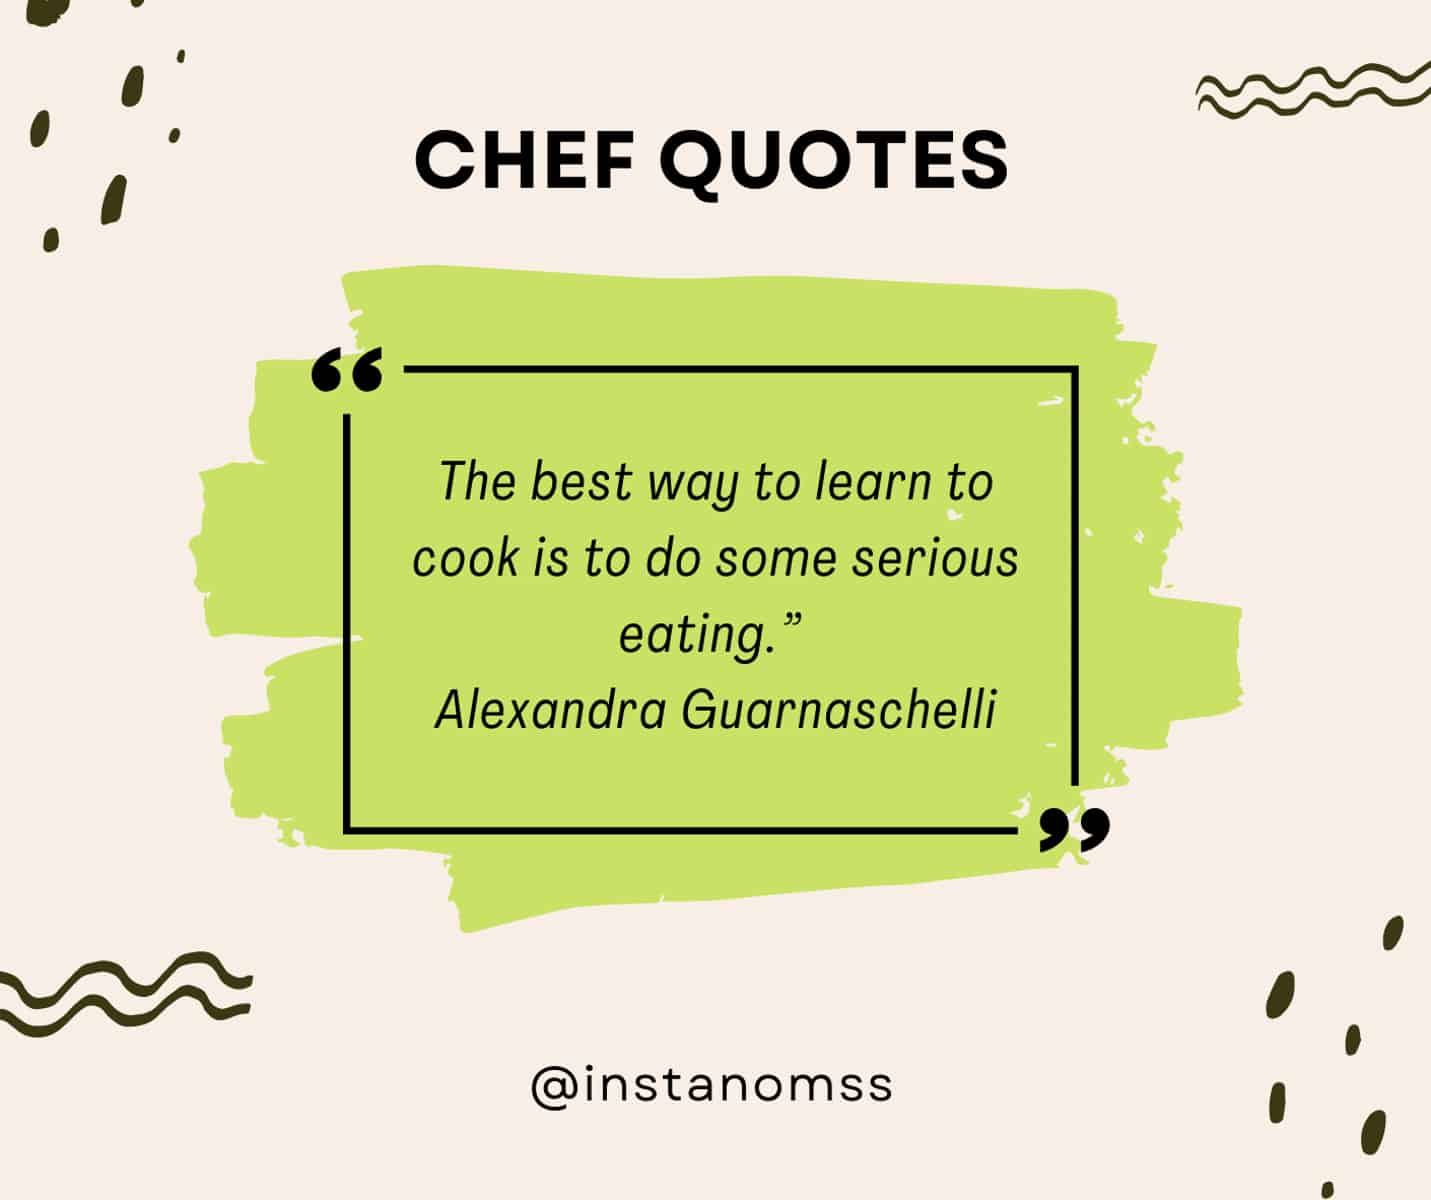 The best way to learn to cook is to do some serious eating.” Alexandra Guarnaschelli